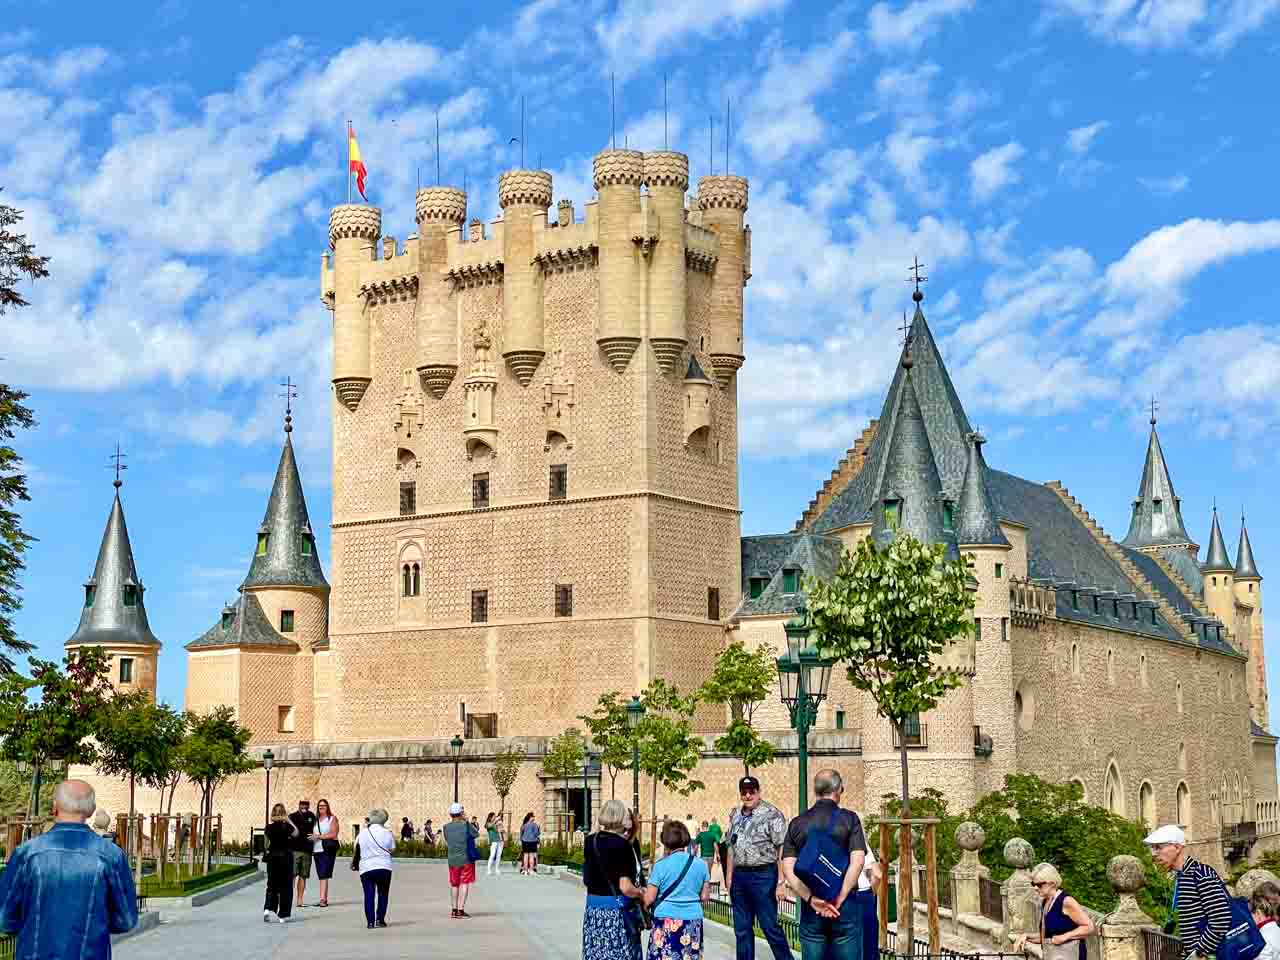 A castle with multiple turrets with tourists waiting to enter.